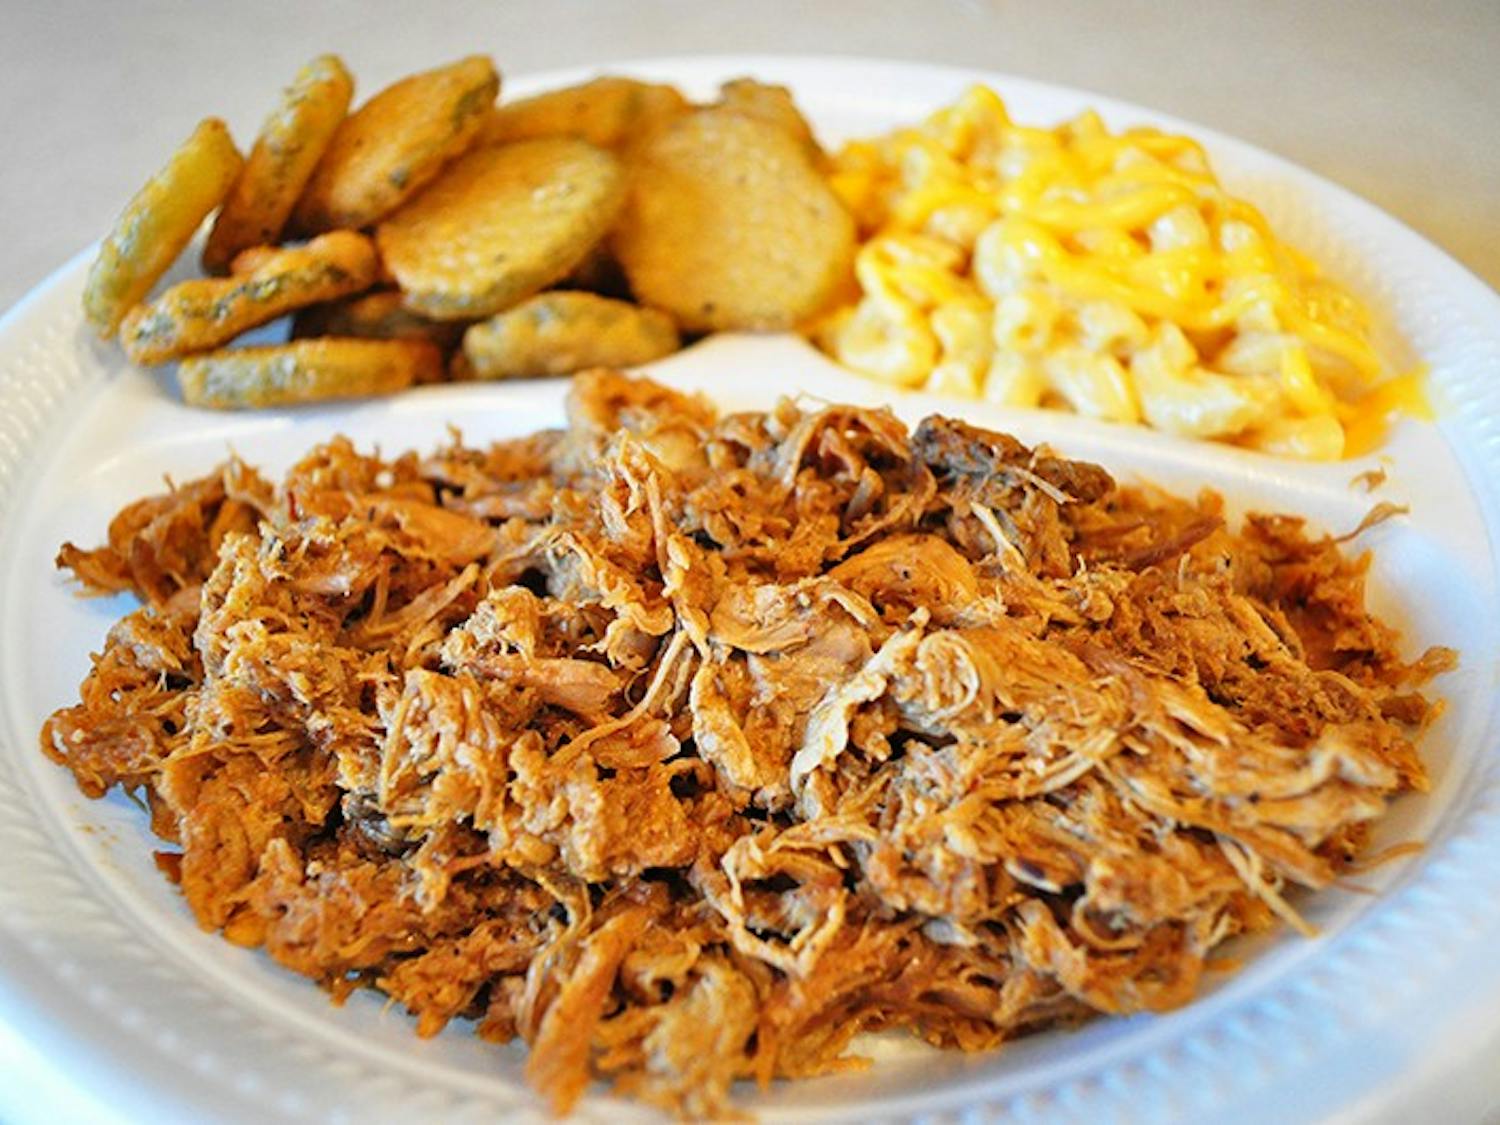 Pulled pork plate with fried pickle chips and mac'n'cheese